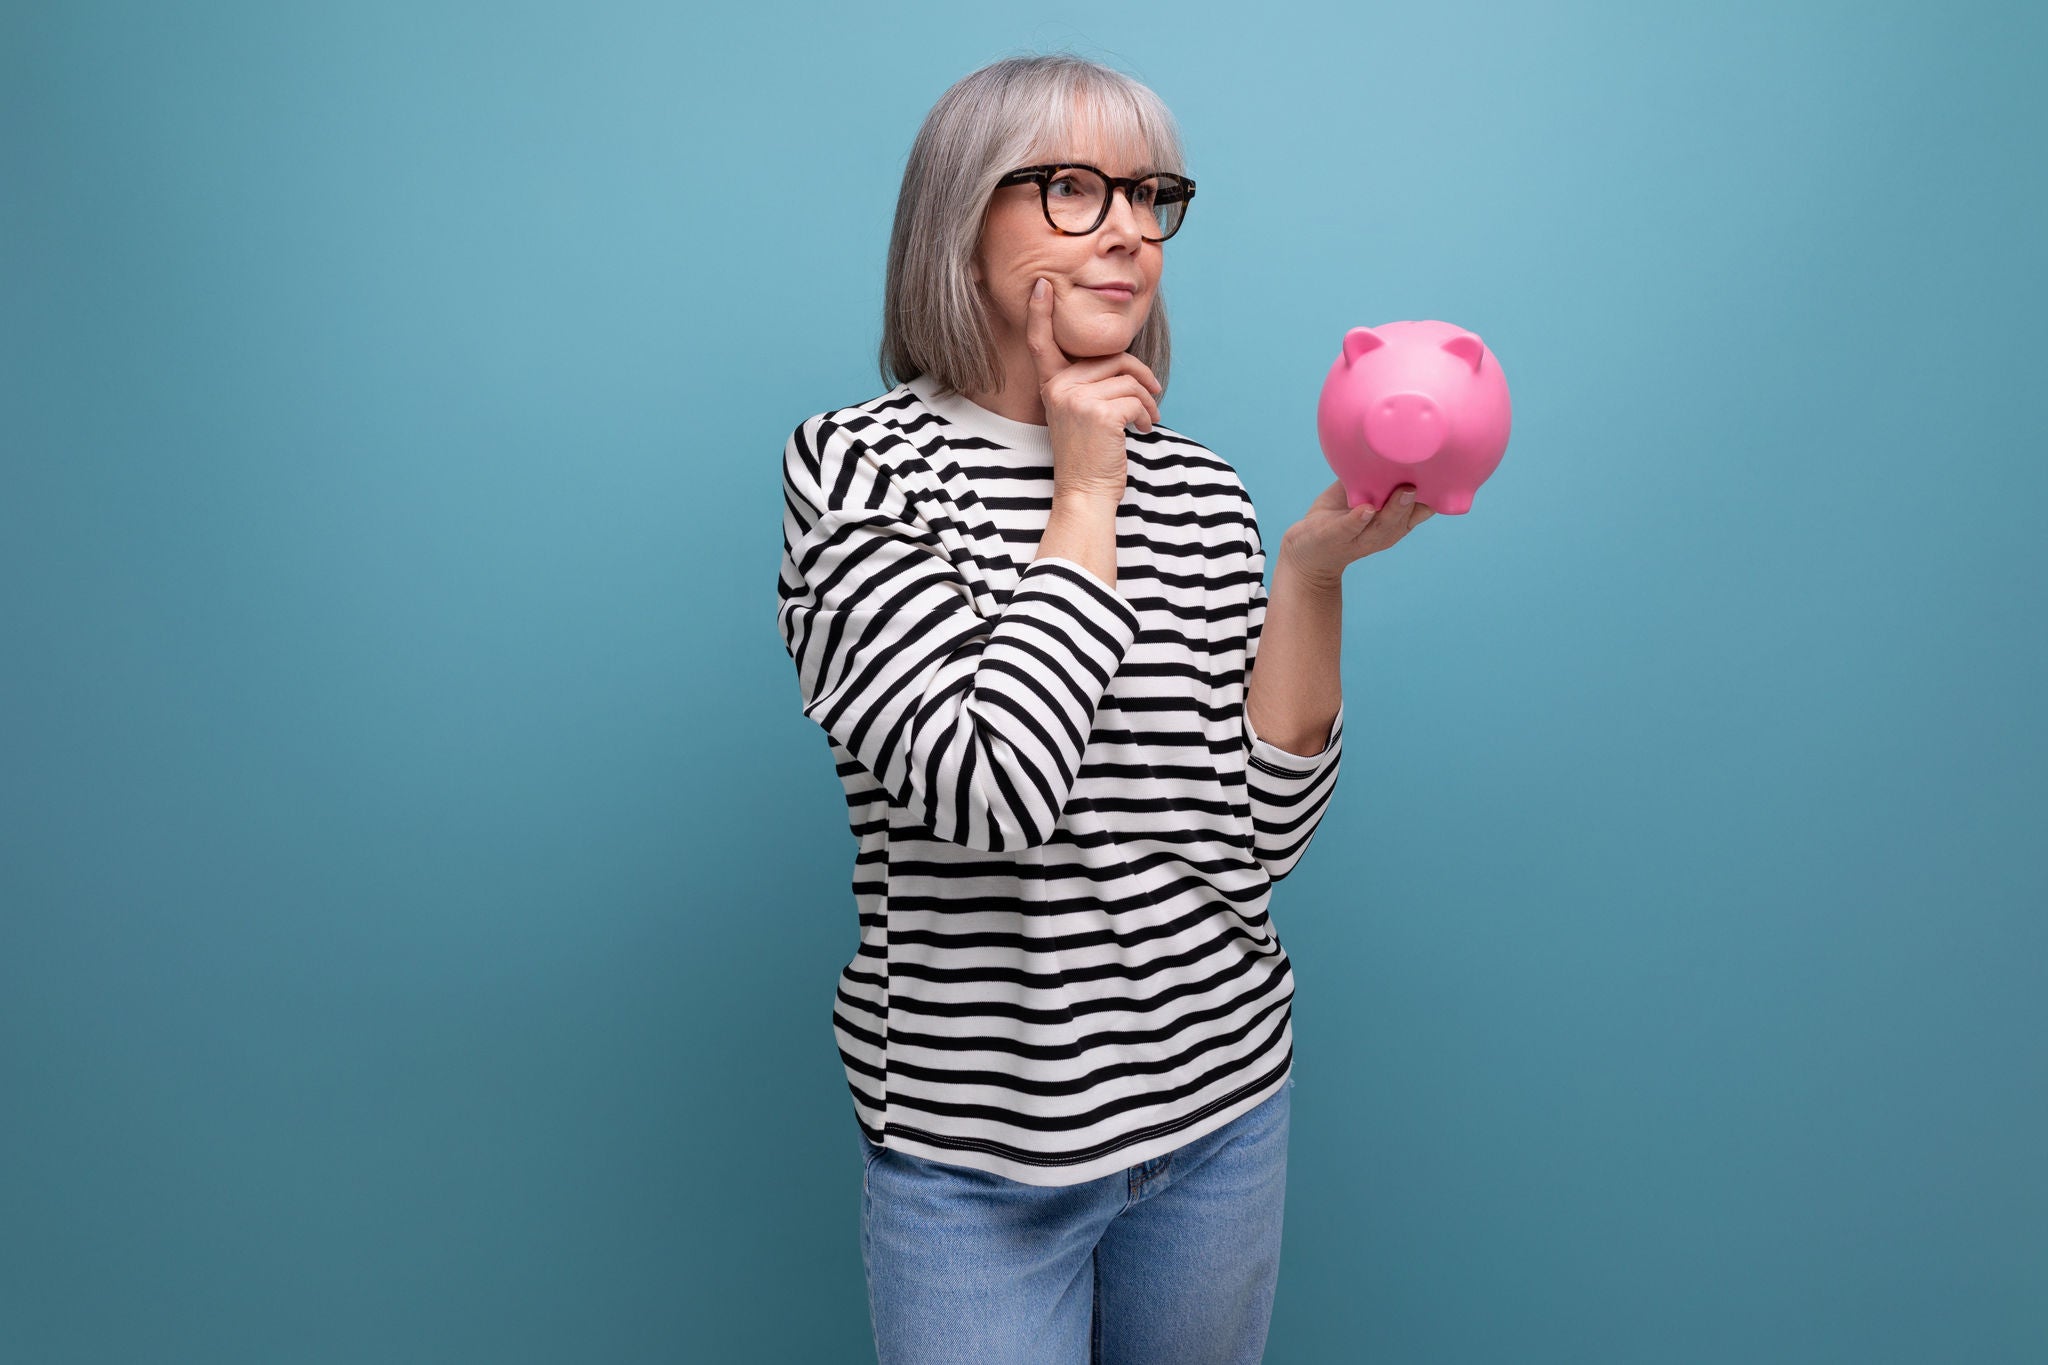 ingenious grandmother middle-aged woman has an idea where to invest her savings from a piggy bank on a bright background with save space.